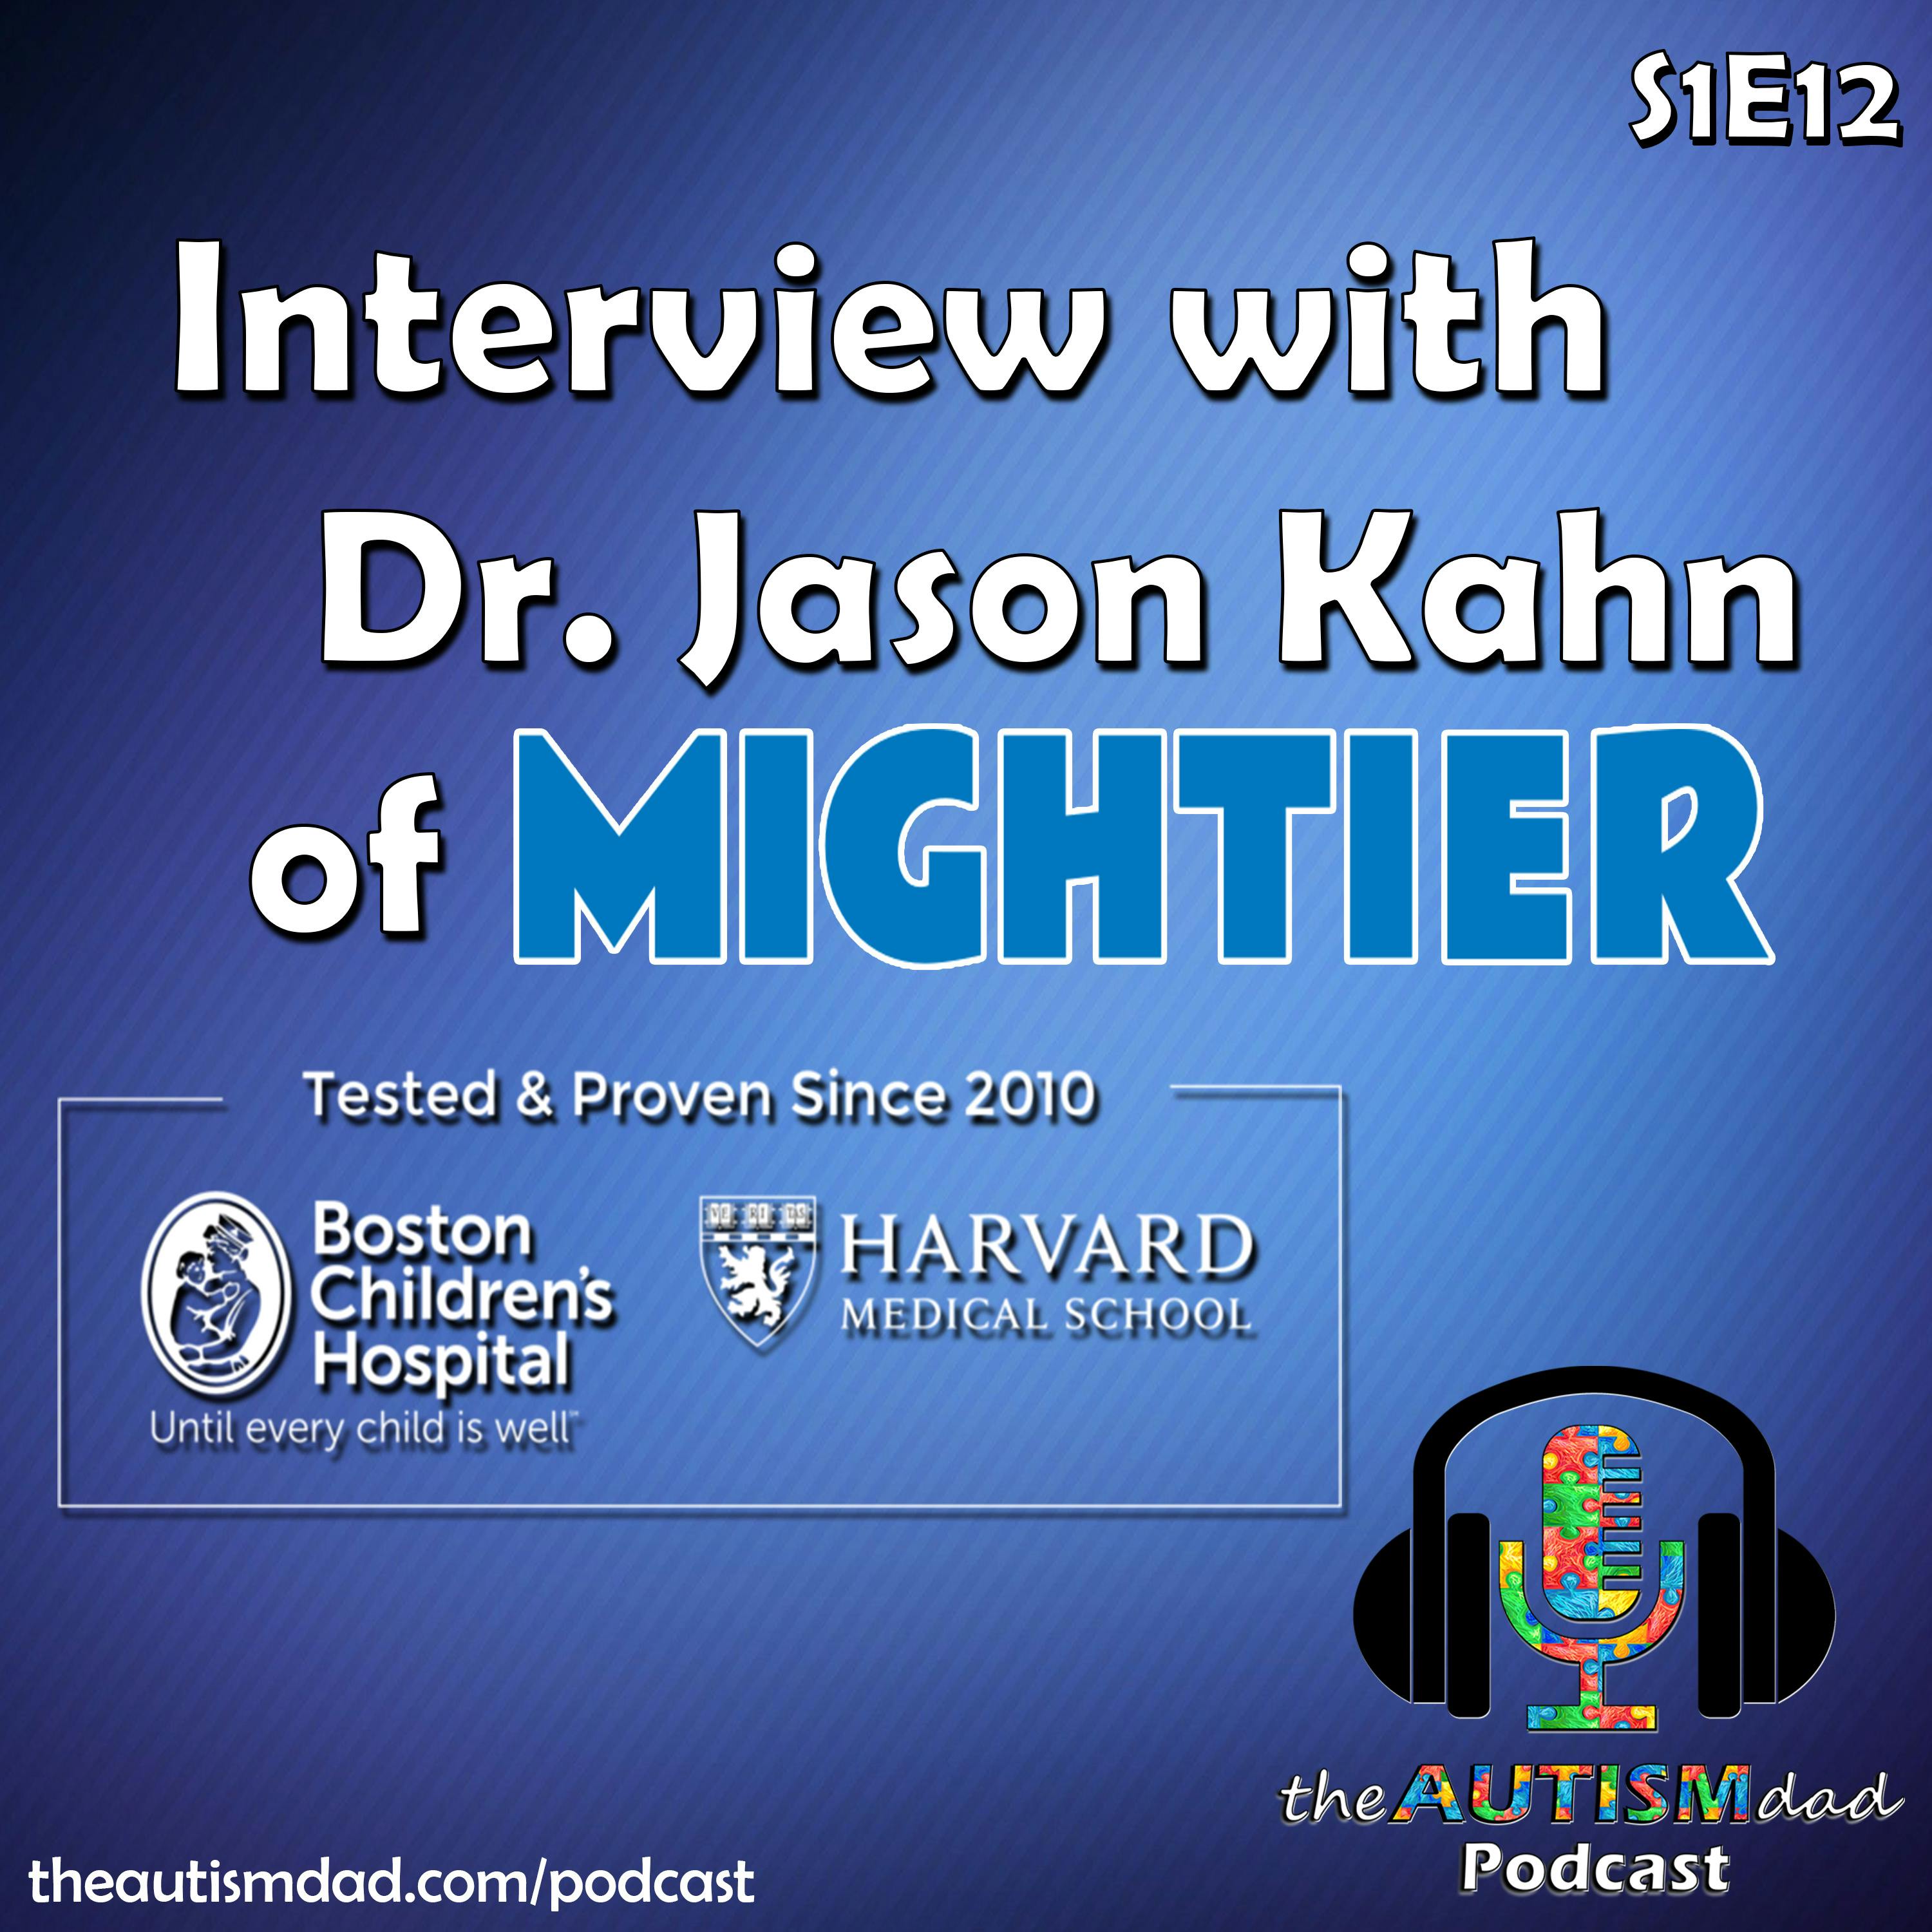 Dr. Jason Kahn on managing meltdowns with Mightier Image